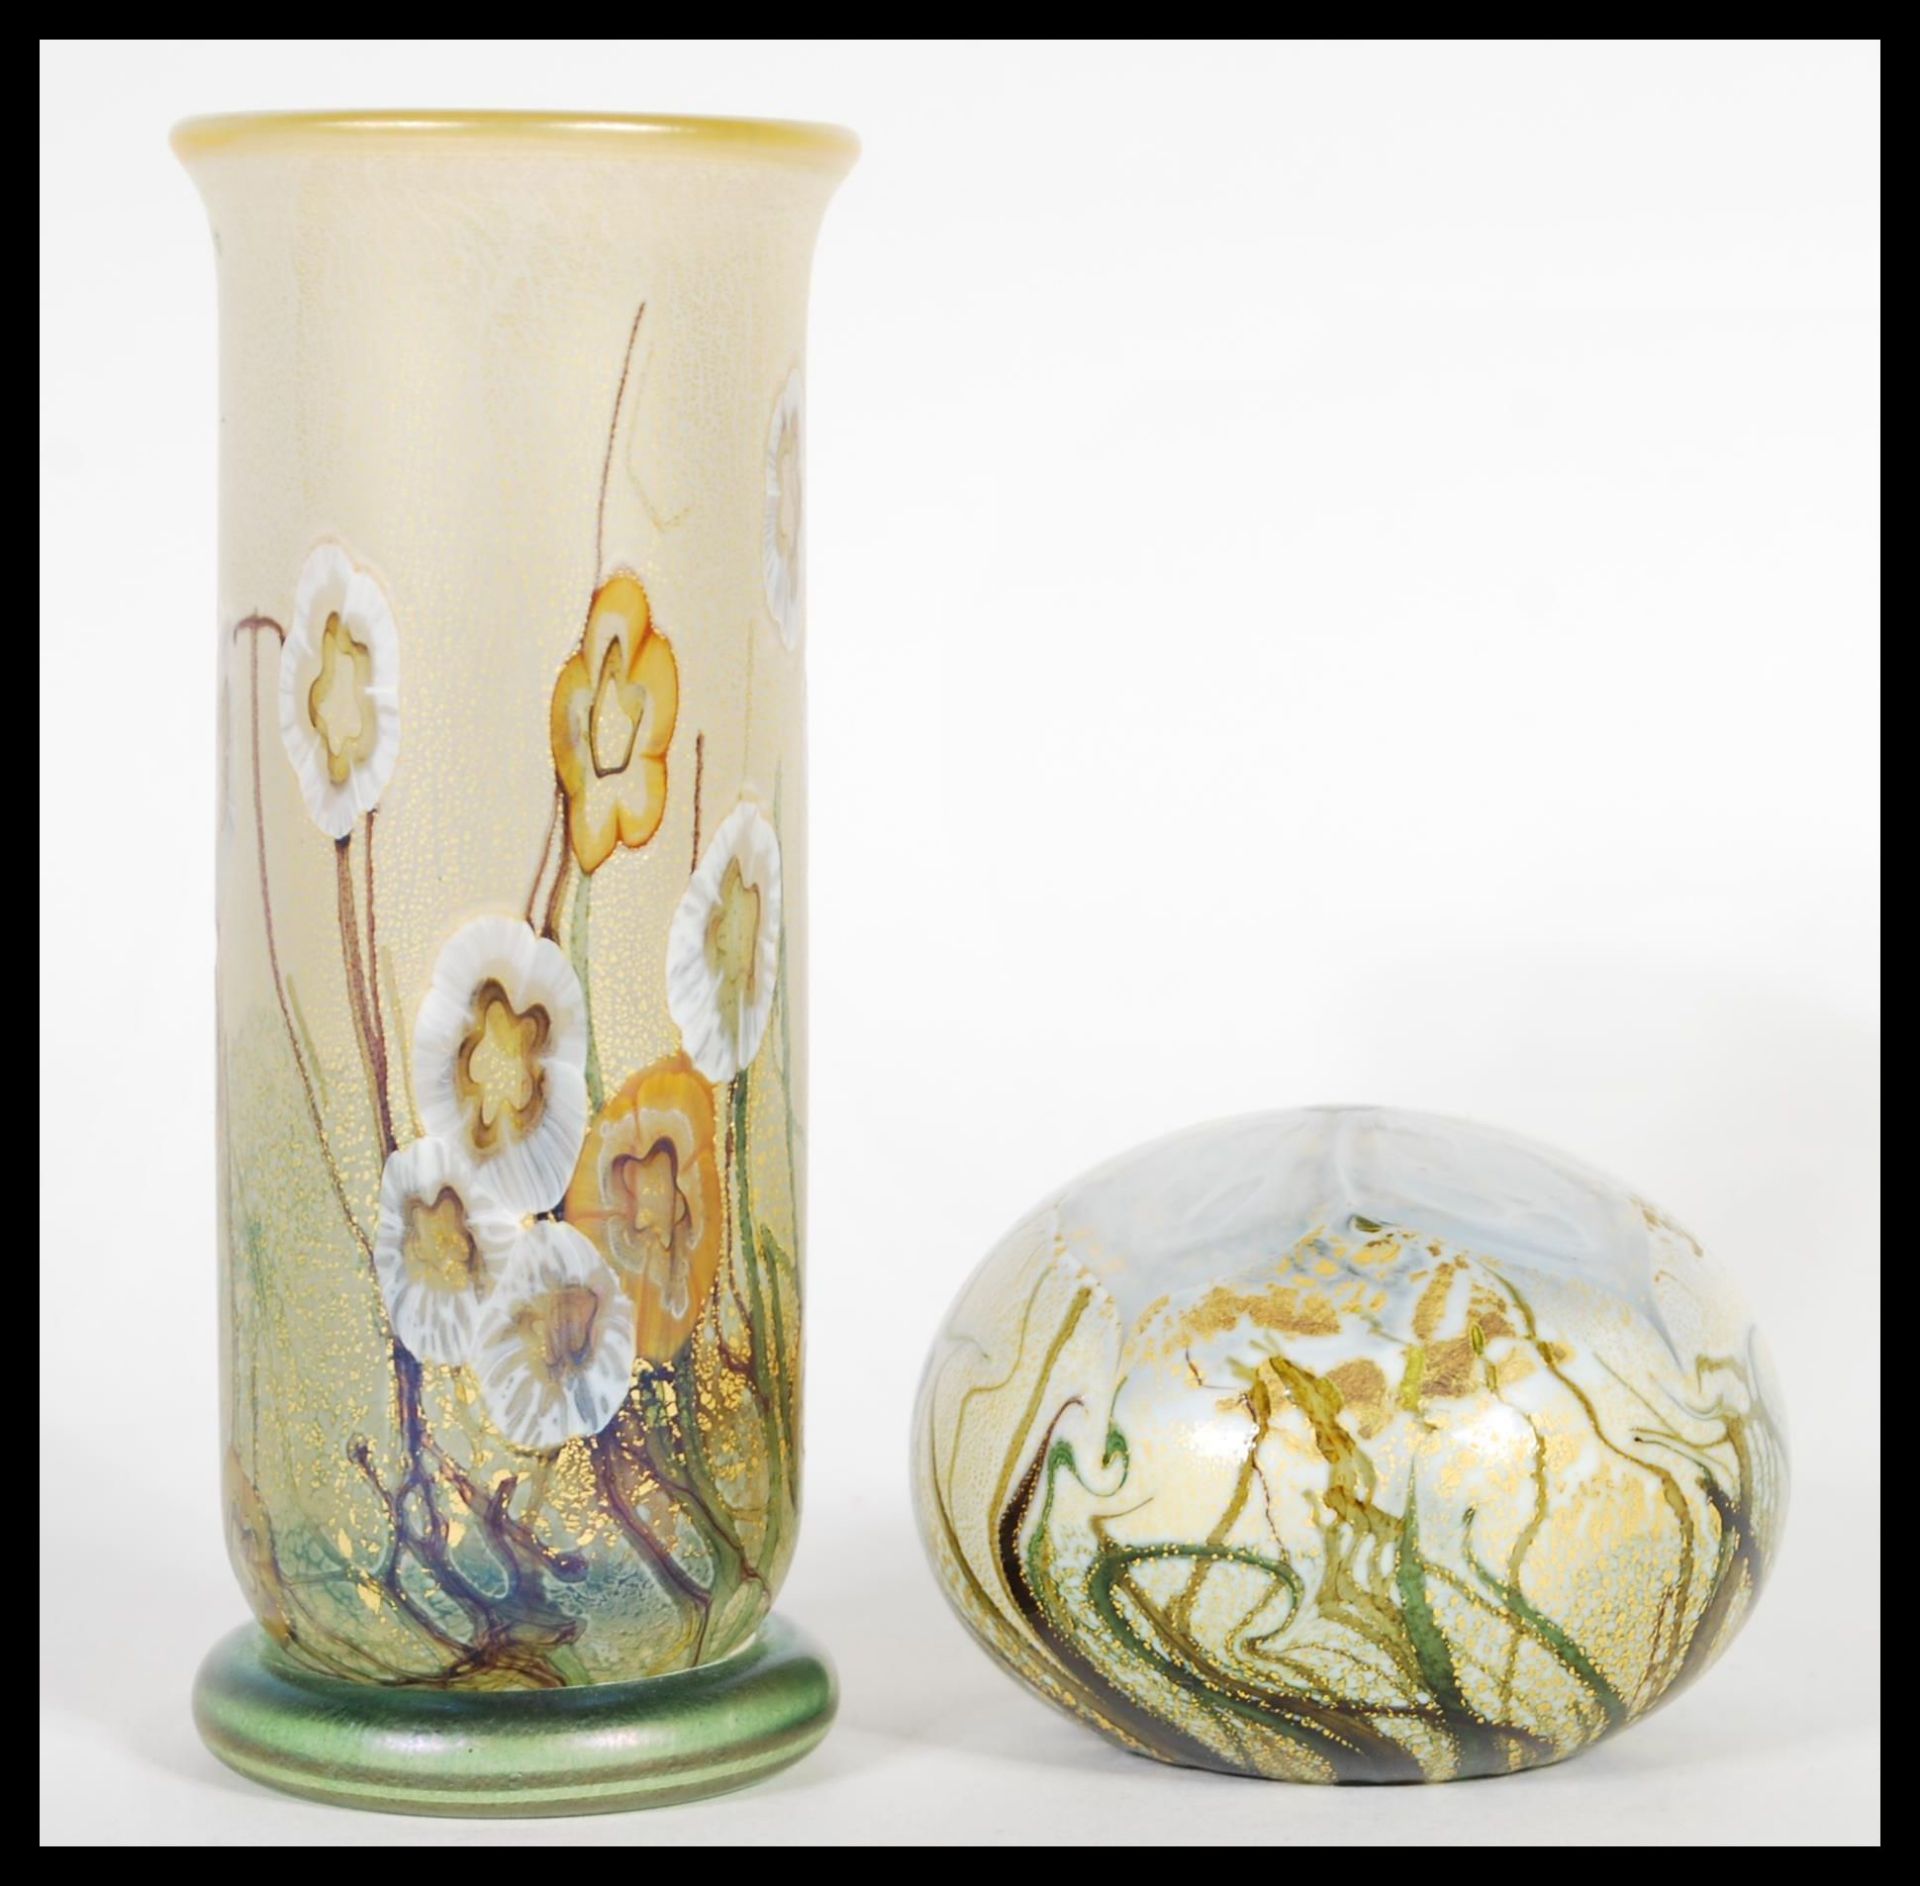 Timothy Harris - Isle Of Wight Glass - Wild Gardens - Two early 21st century studio art glass pieces - Image 2 of 5